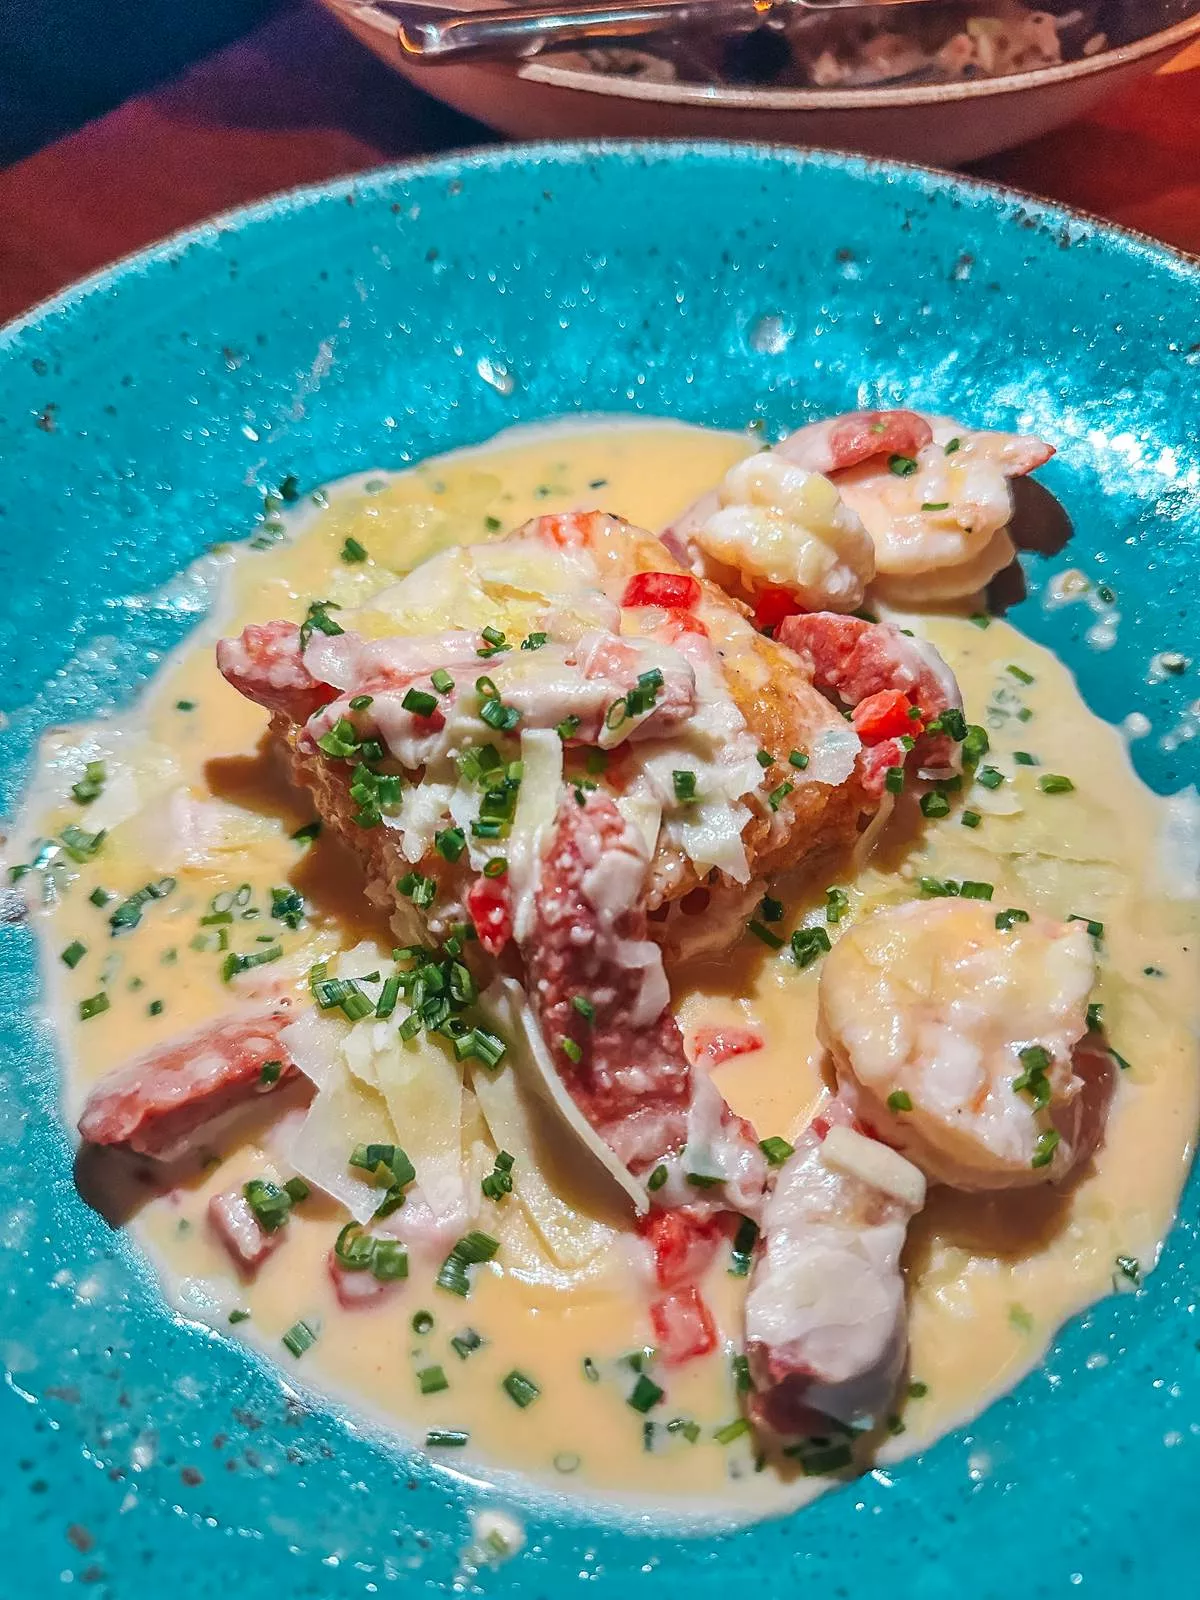 Shrimp and grits from The Waterfront Restaurant in AMI